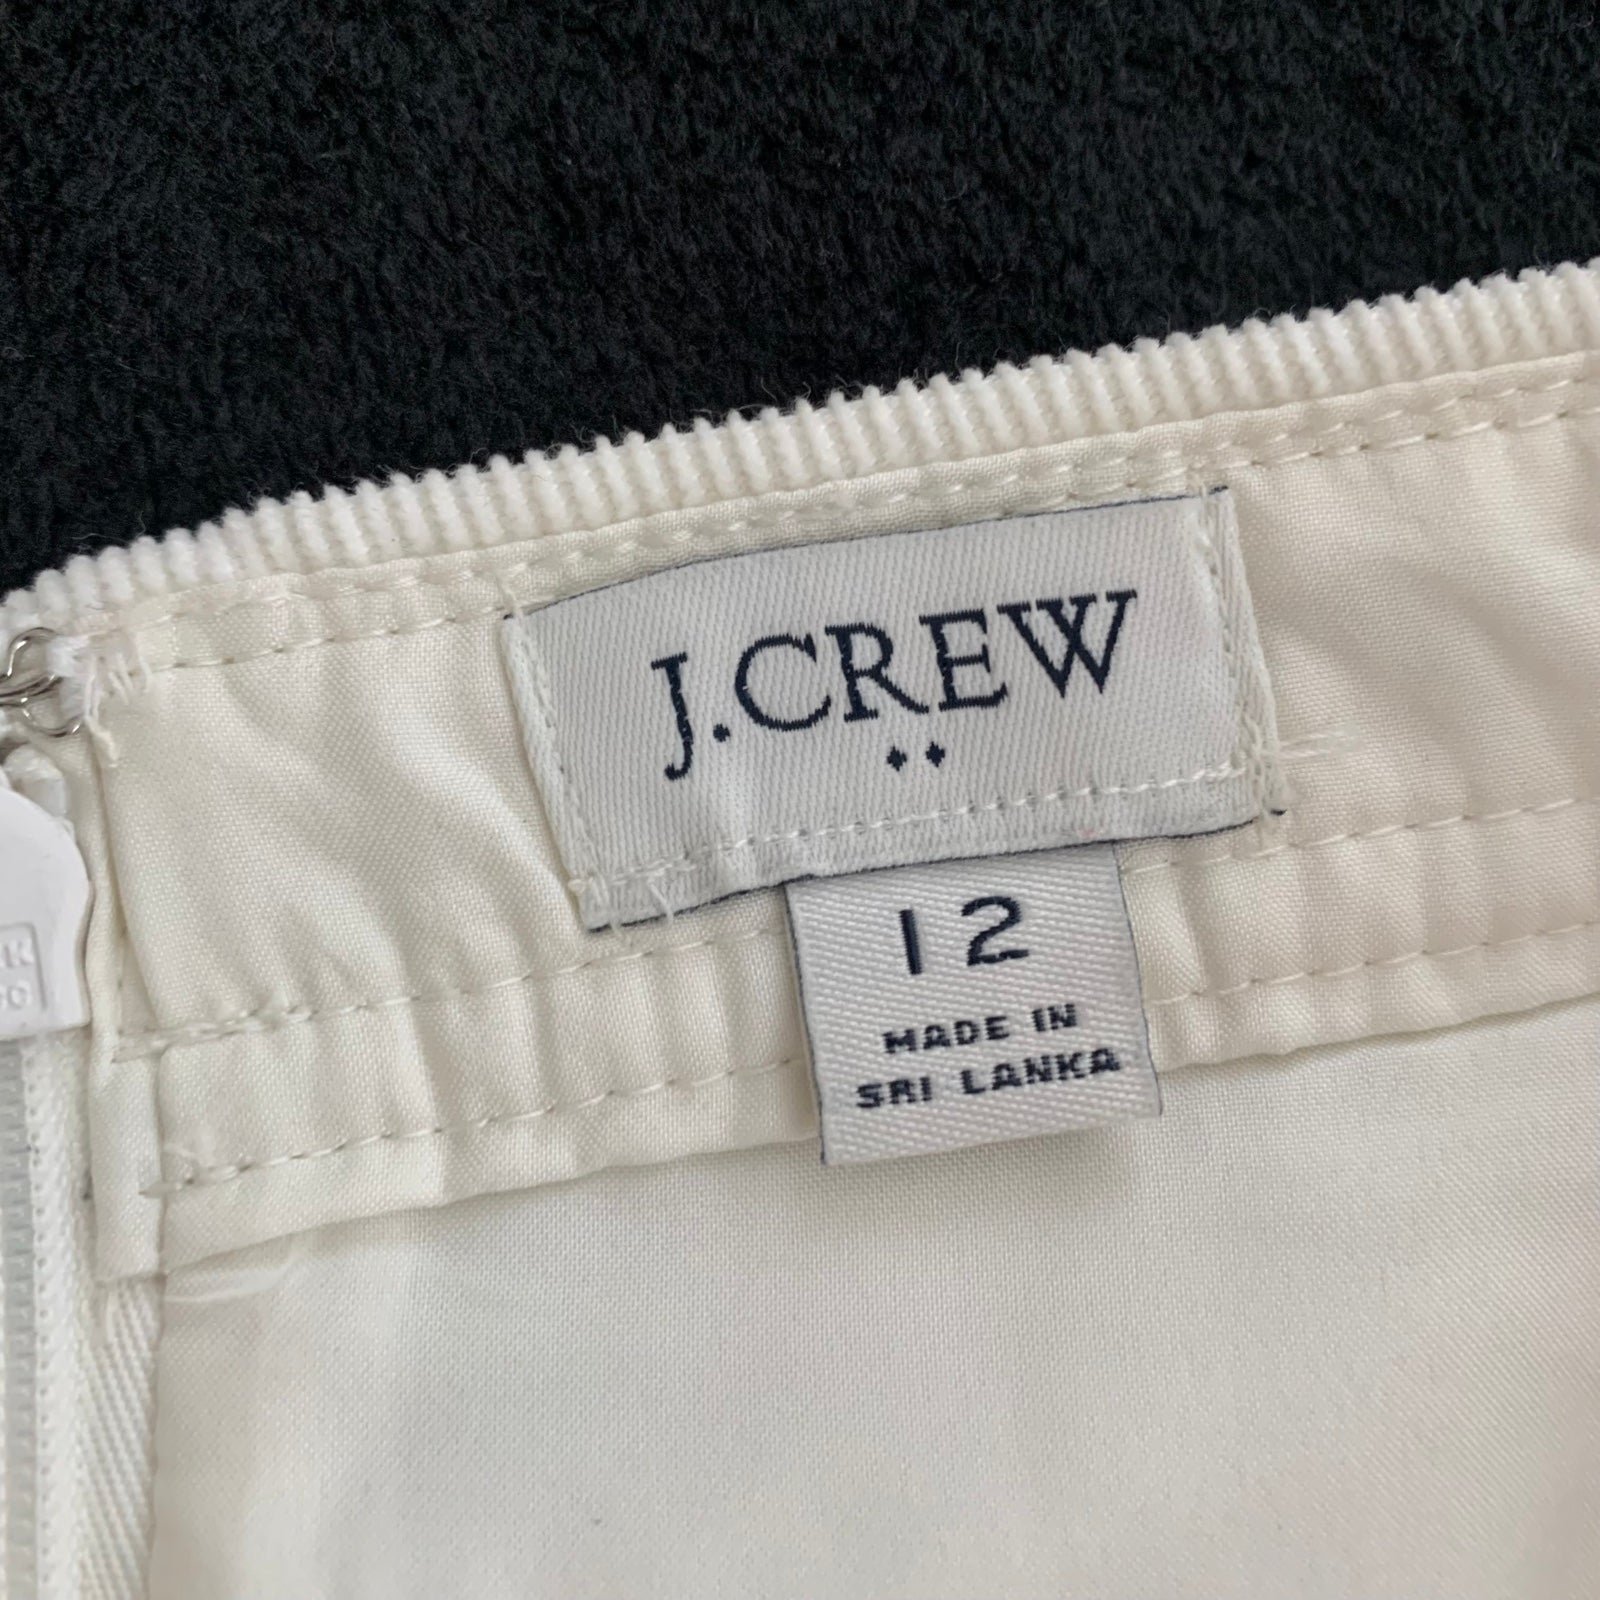 High quality J. Crew Womens Ivory Corduroy Buttoned Mini Skirt With Pockets Size 12 OOQ1Y6B4Z US Sale